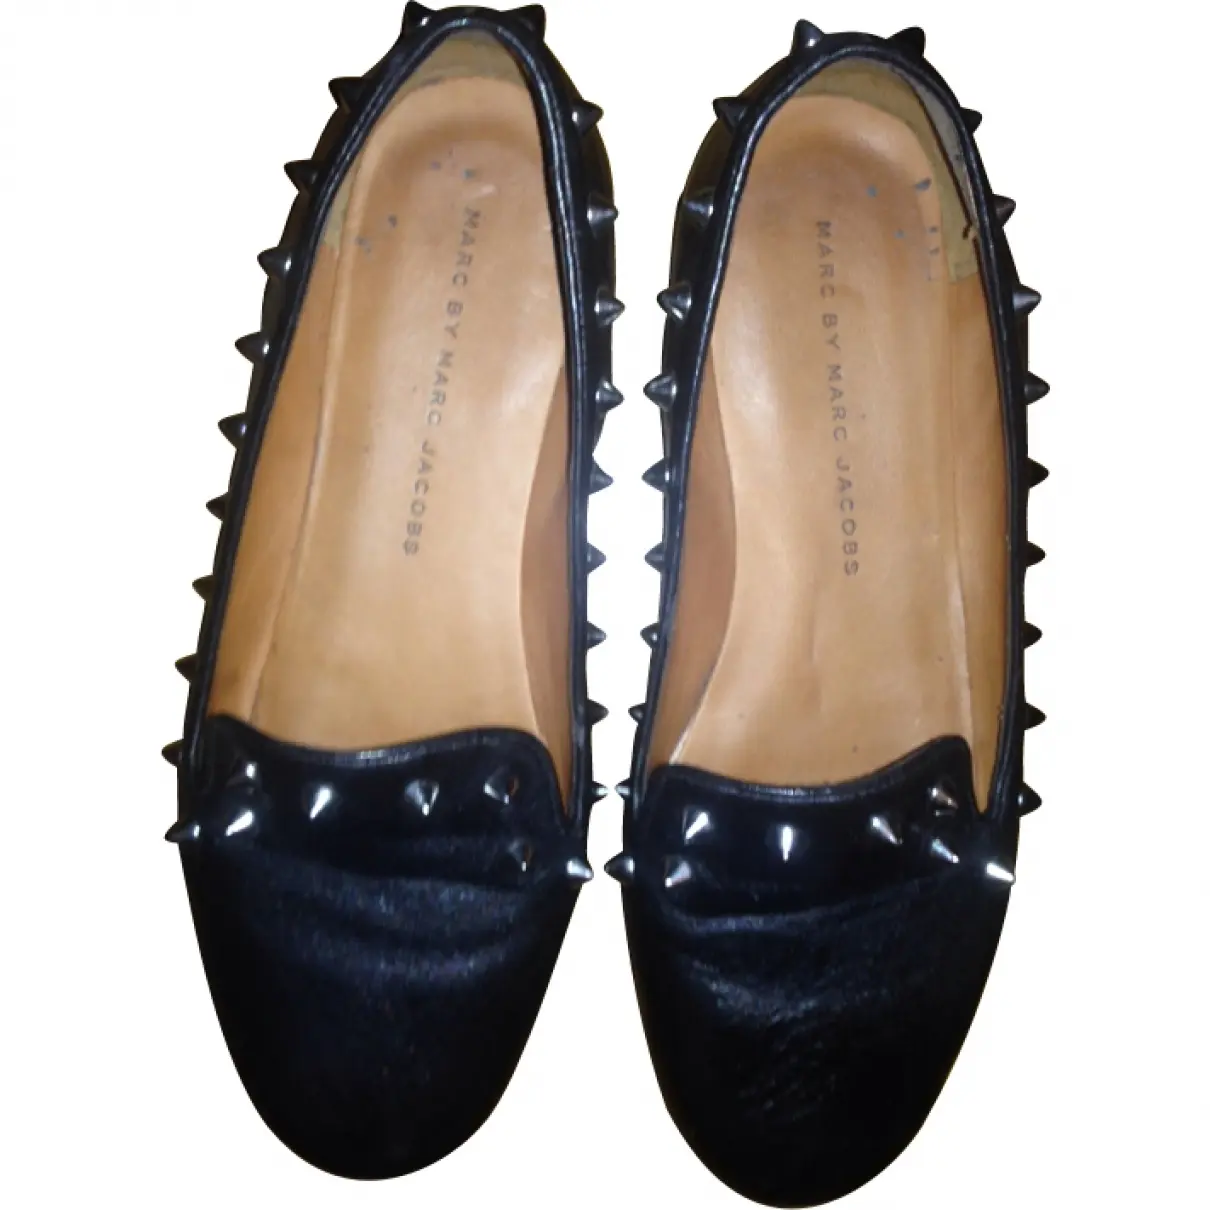 Black Leather Ballet flats Marc by Marc Jacobs